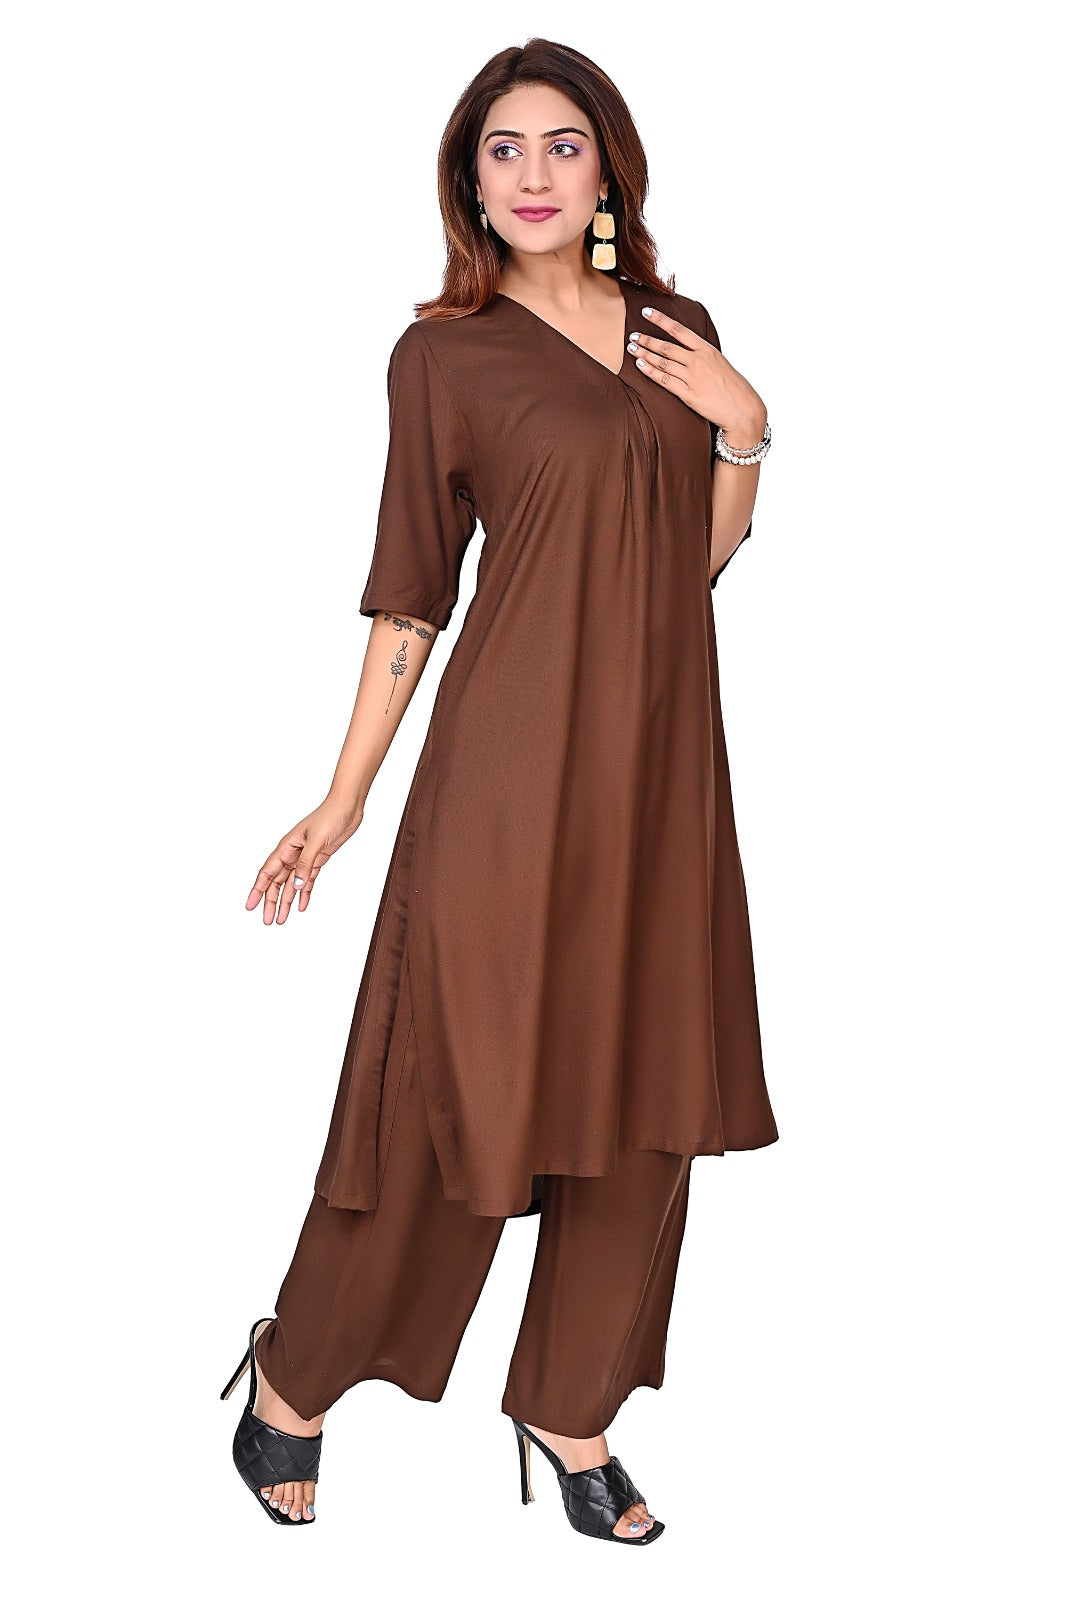 Nirmal online Rayon Premium quality fabric co-ord set kurti for Women in Brown colour